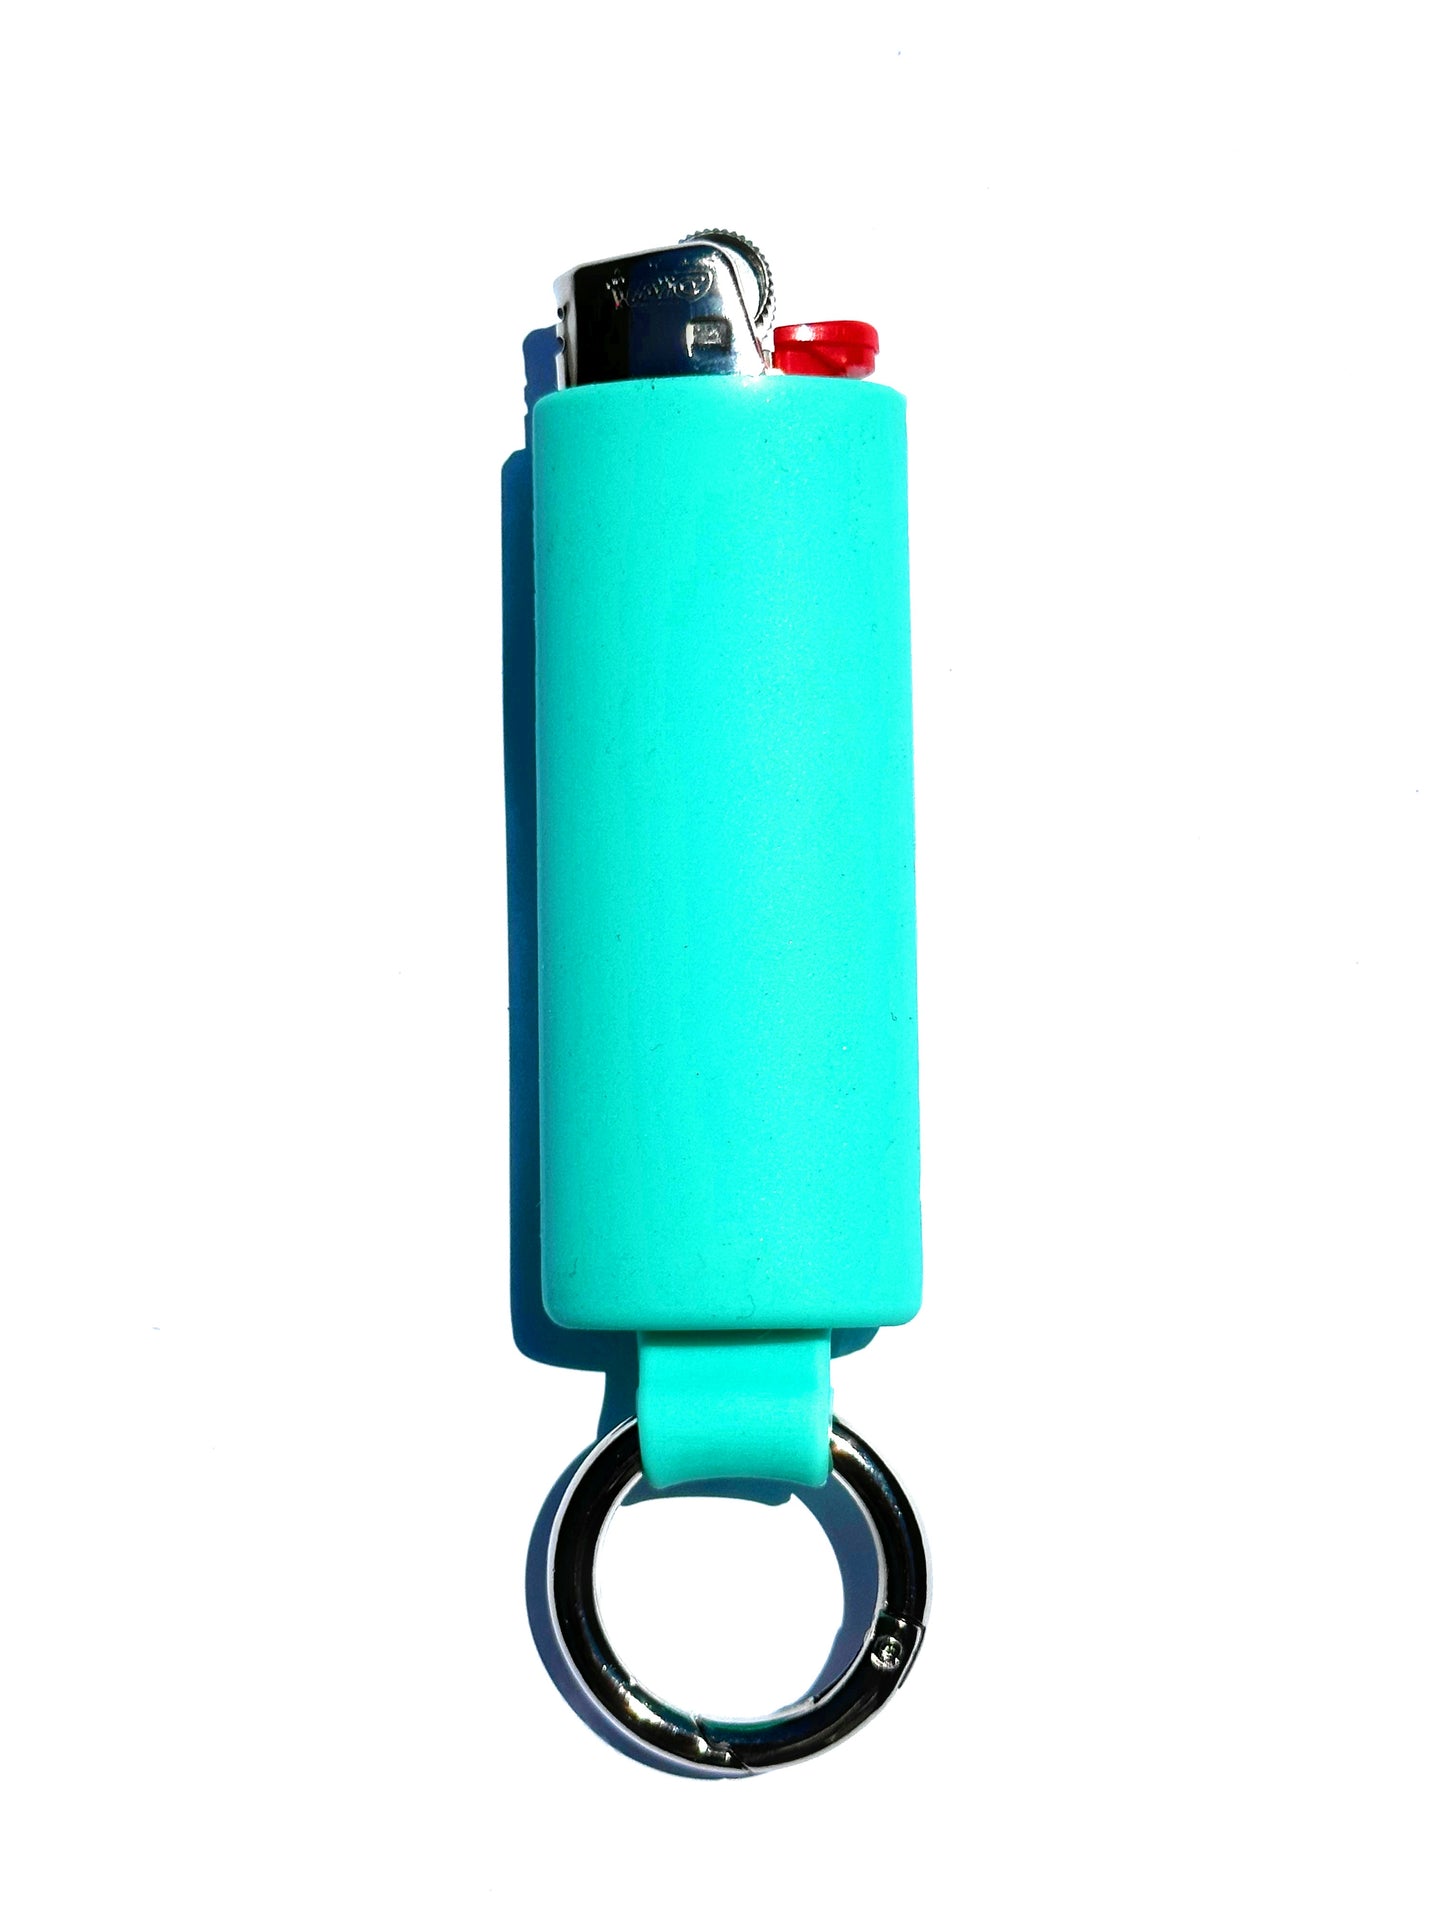 Aqua Blue Lighter Holder Keychain with Spring Clip made by Lighter Locators